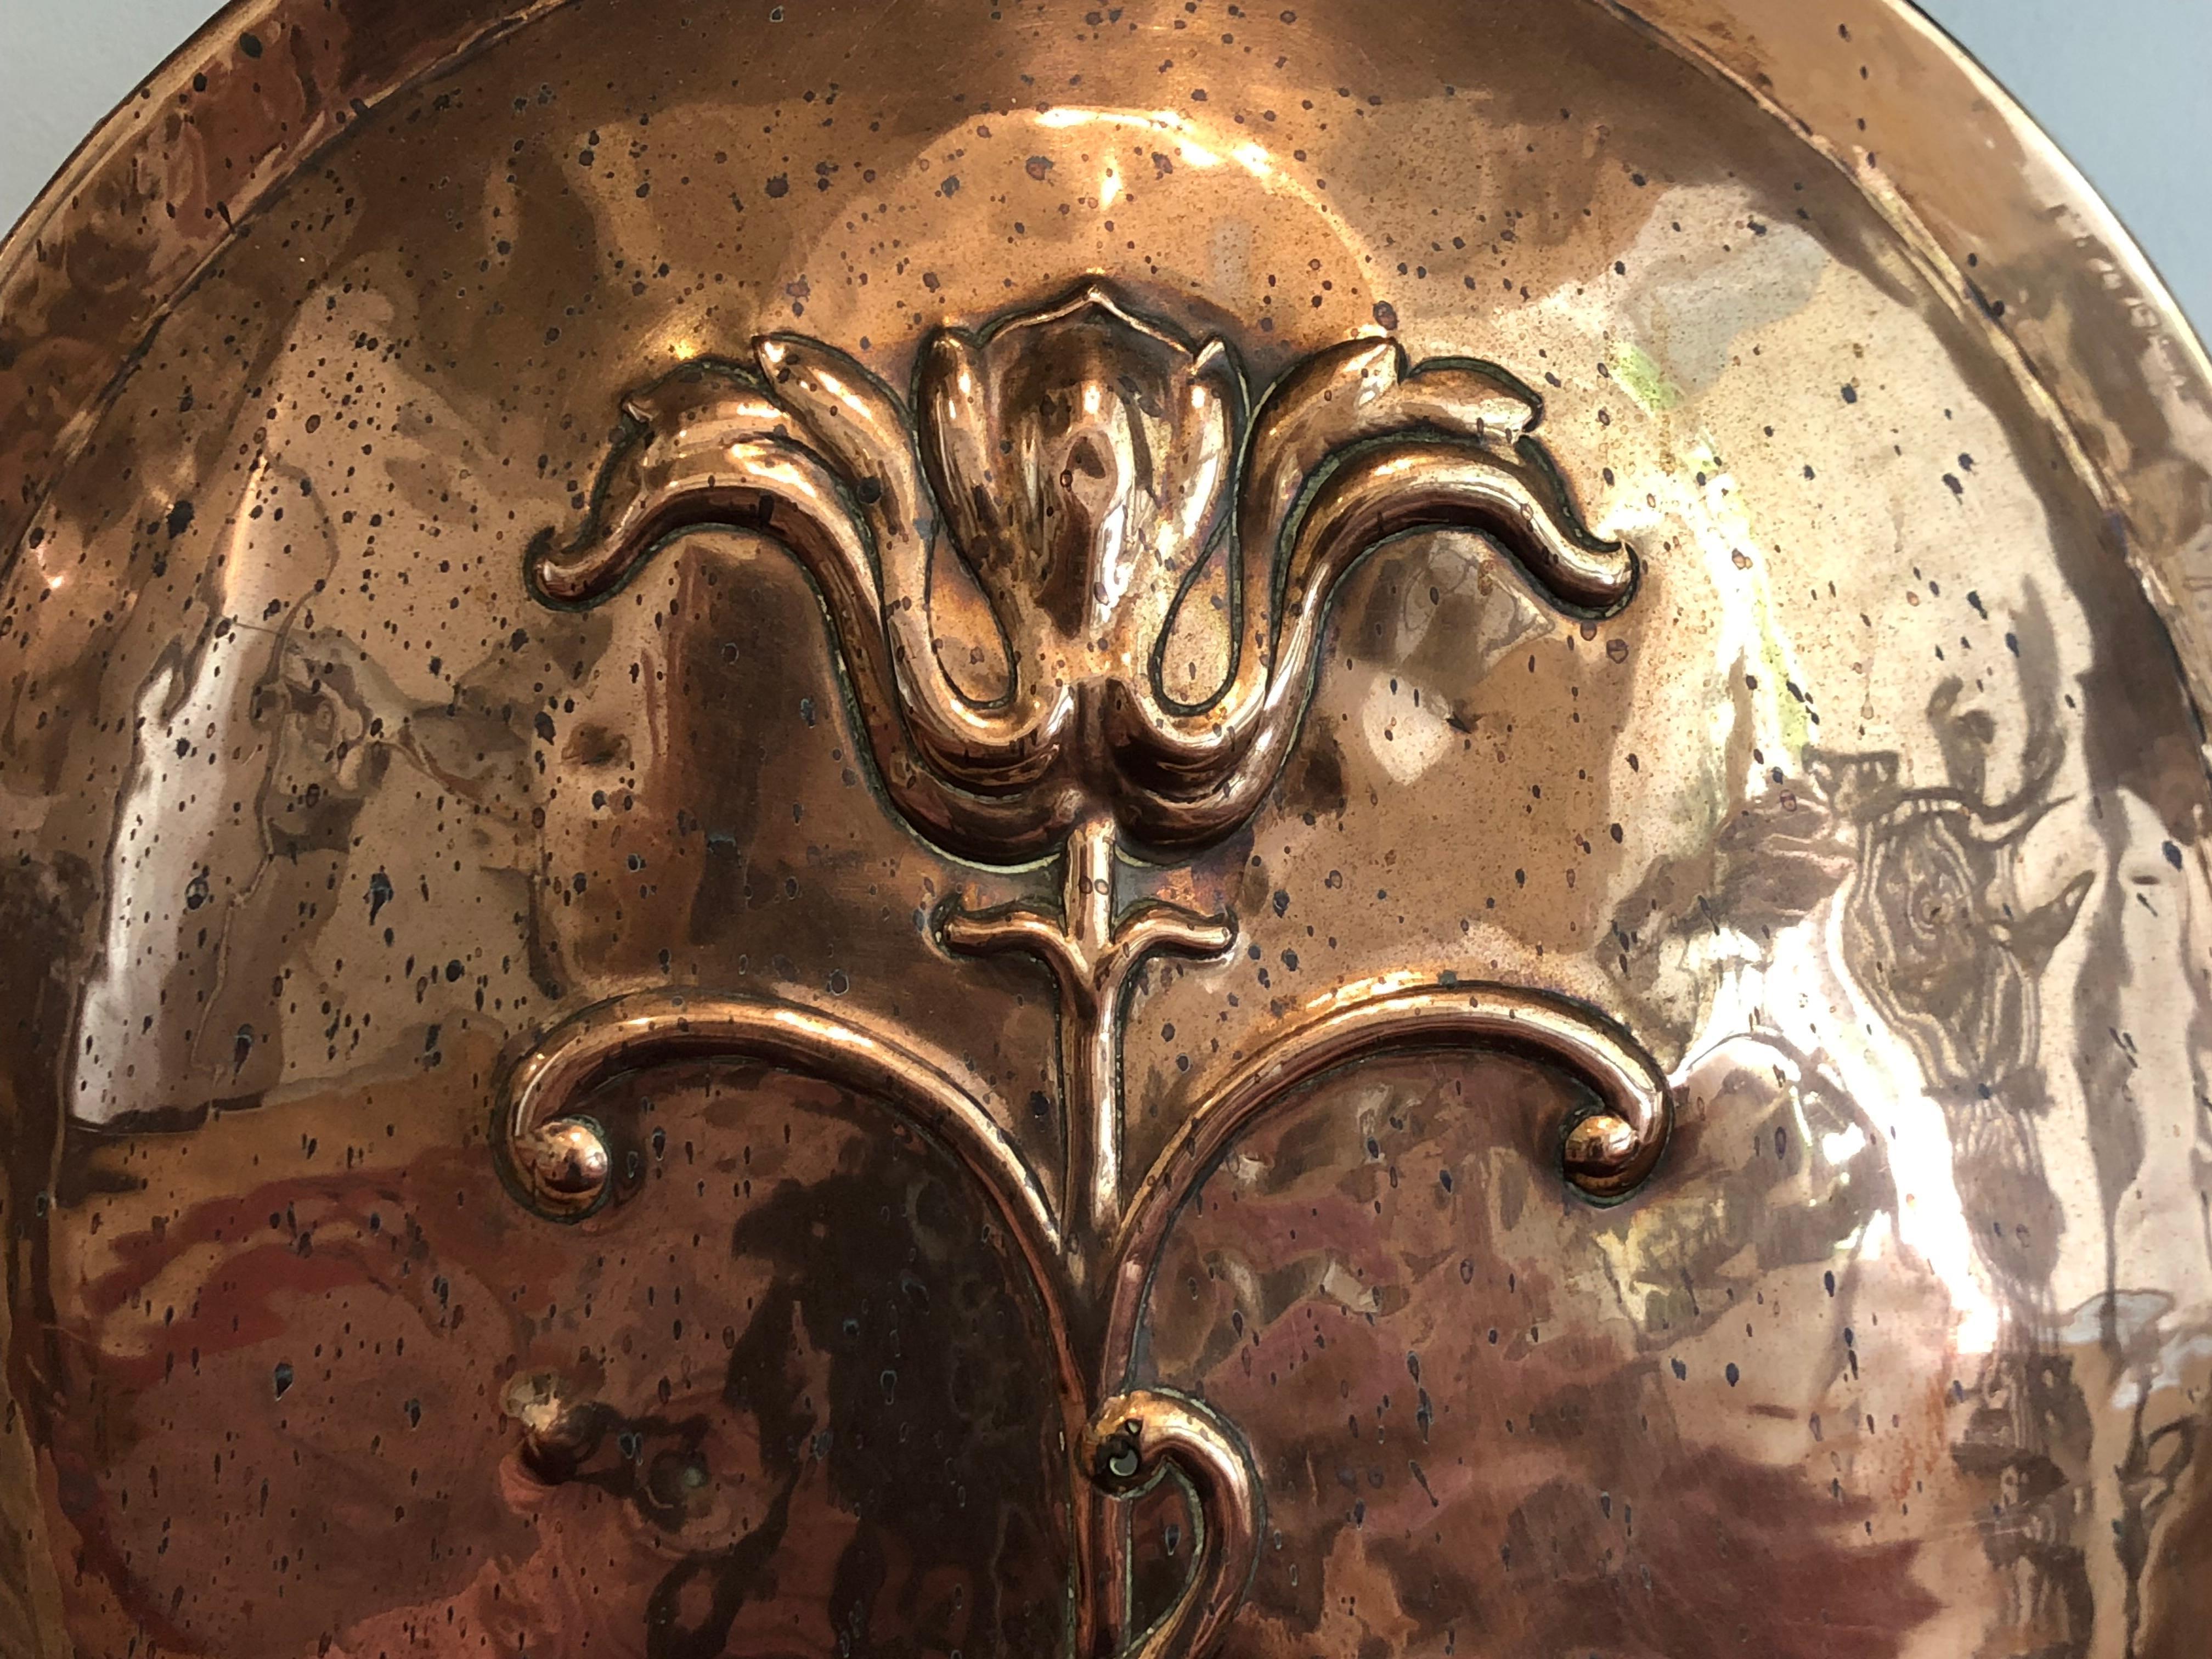 A wonderful copper fire screen in the classic arts and crafts style. 
This screen in hand beaten copper features a large oval with an embossed, stylized flower, the whole surrounded by a hand forged iron frame.
Early 20th century, most probably